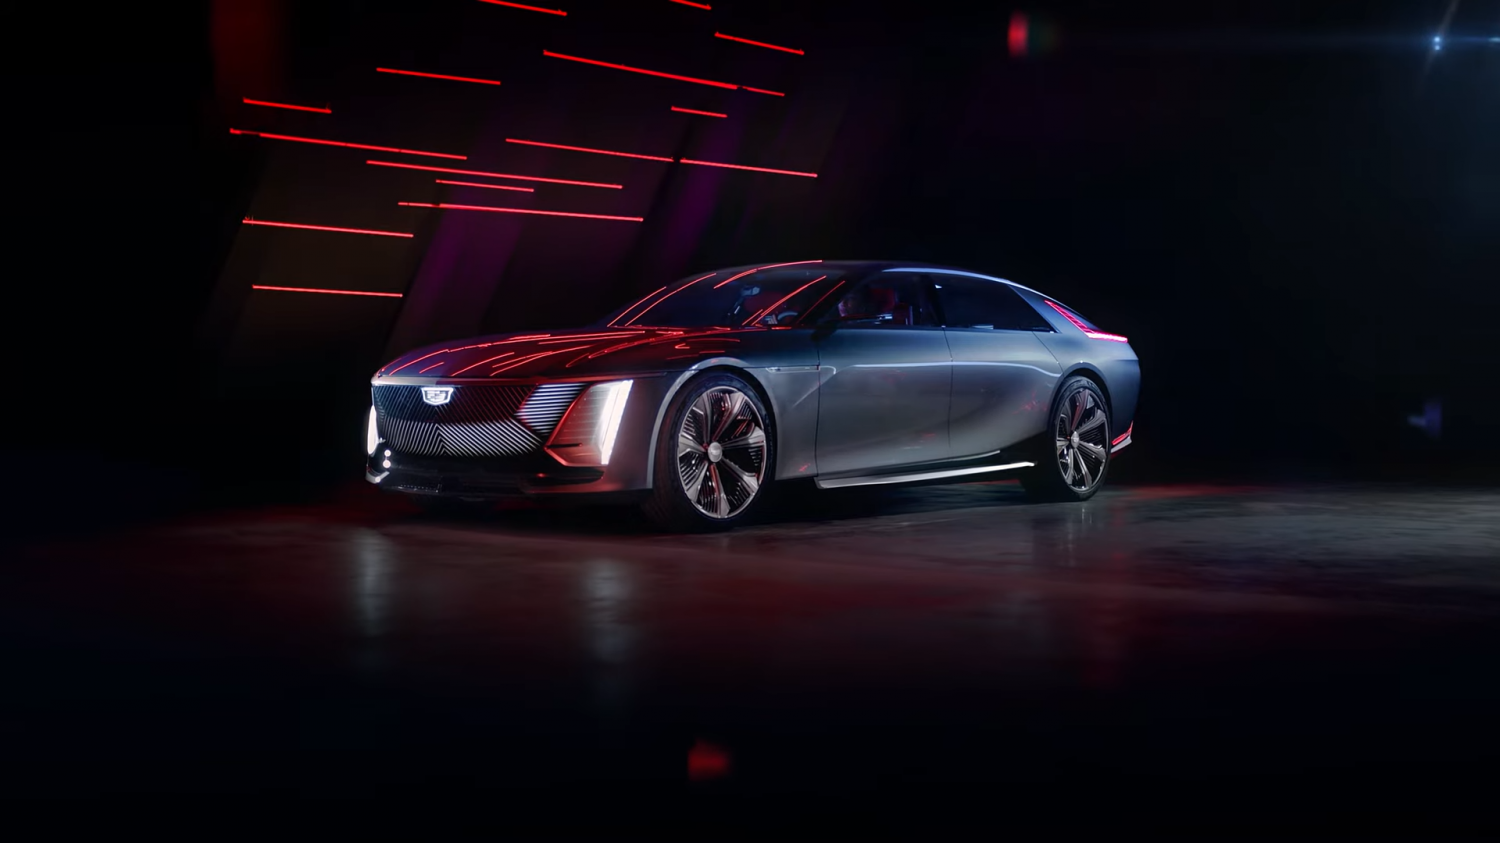 GM finally rolls out the Cadillac Celestiq onto the runway sporting a sleek design and sophisticated tech innovations. 